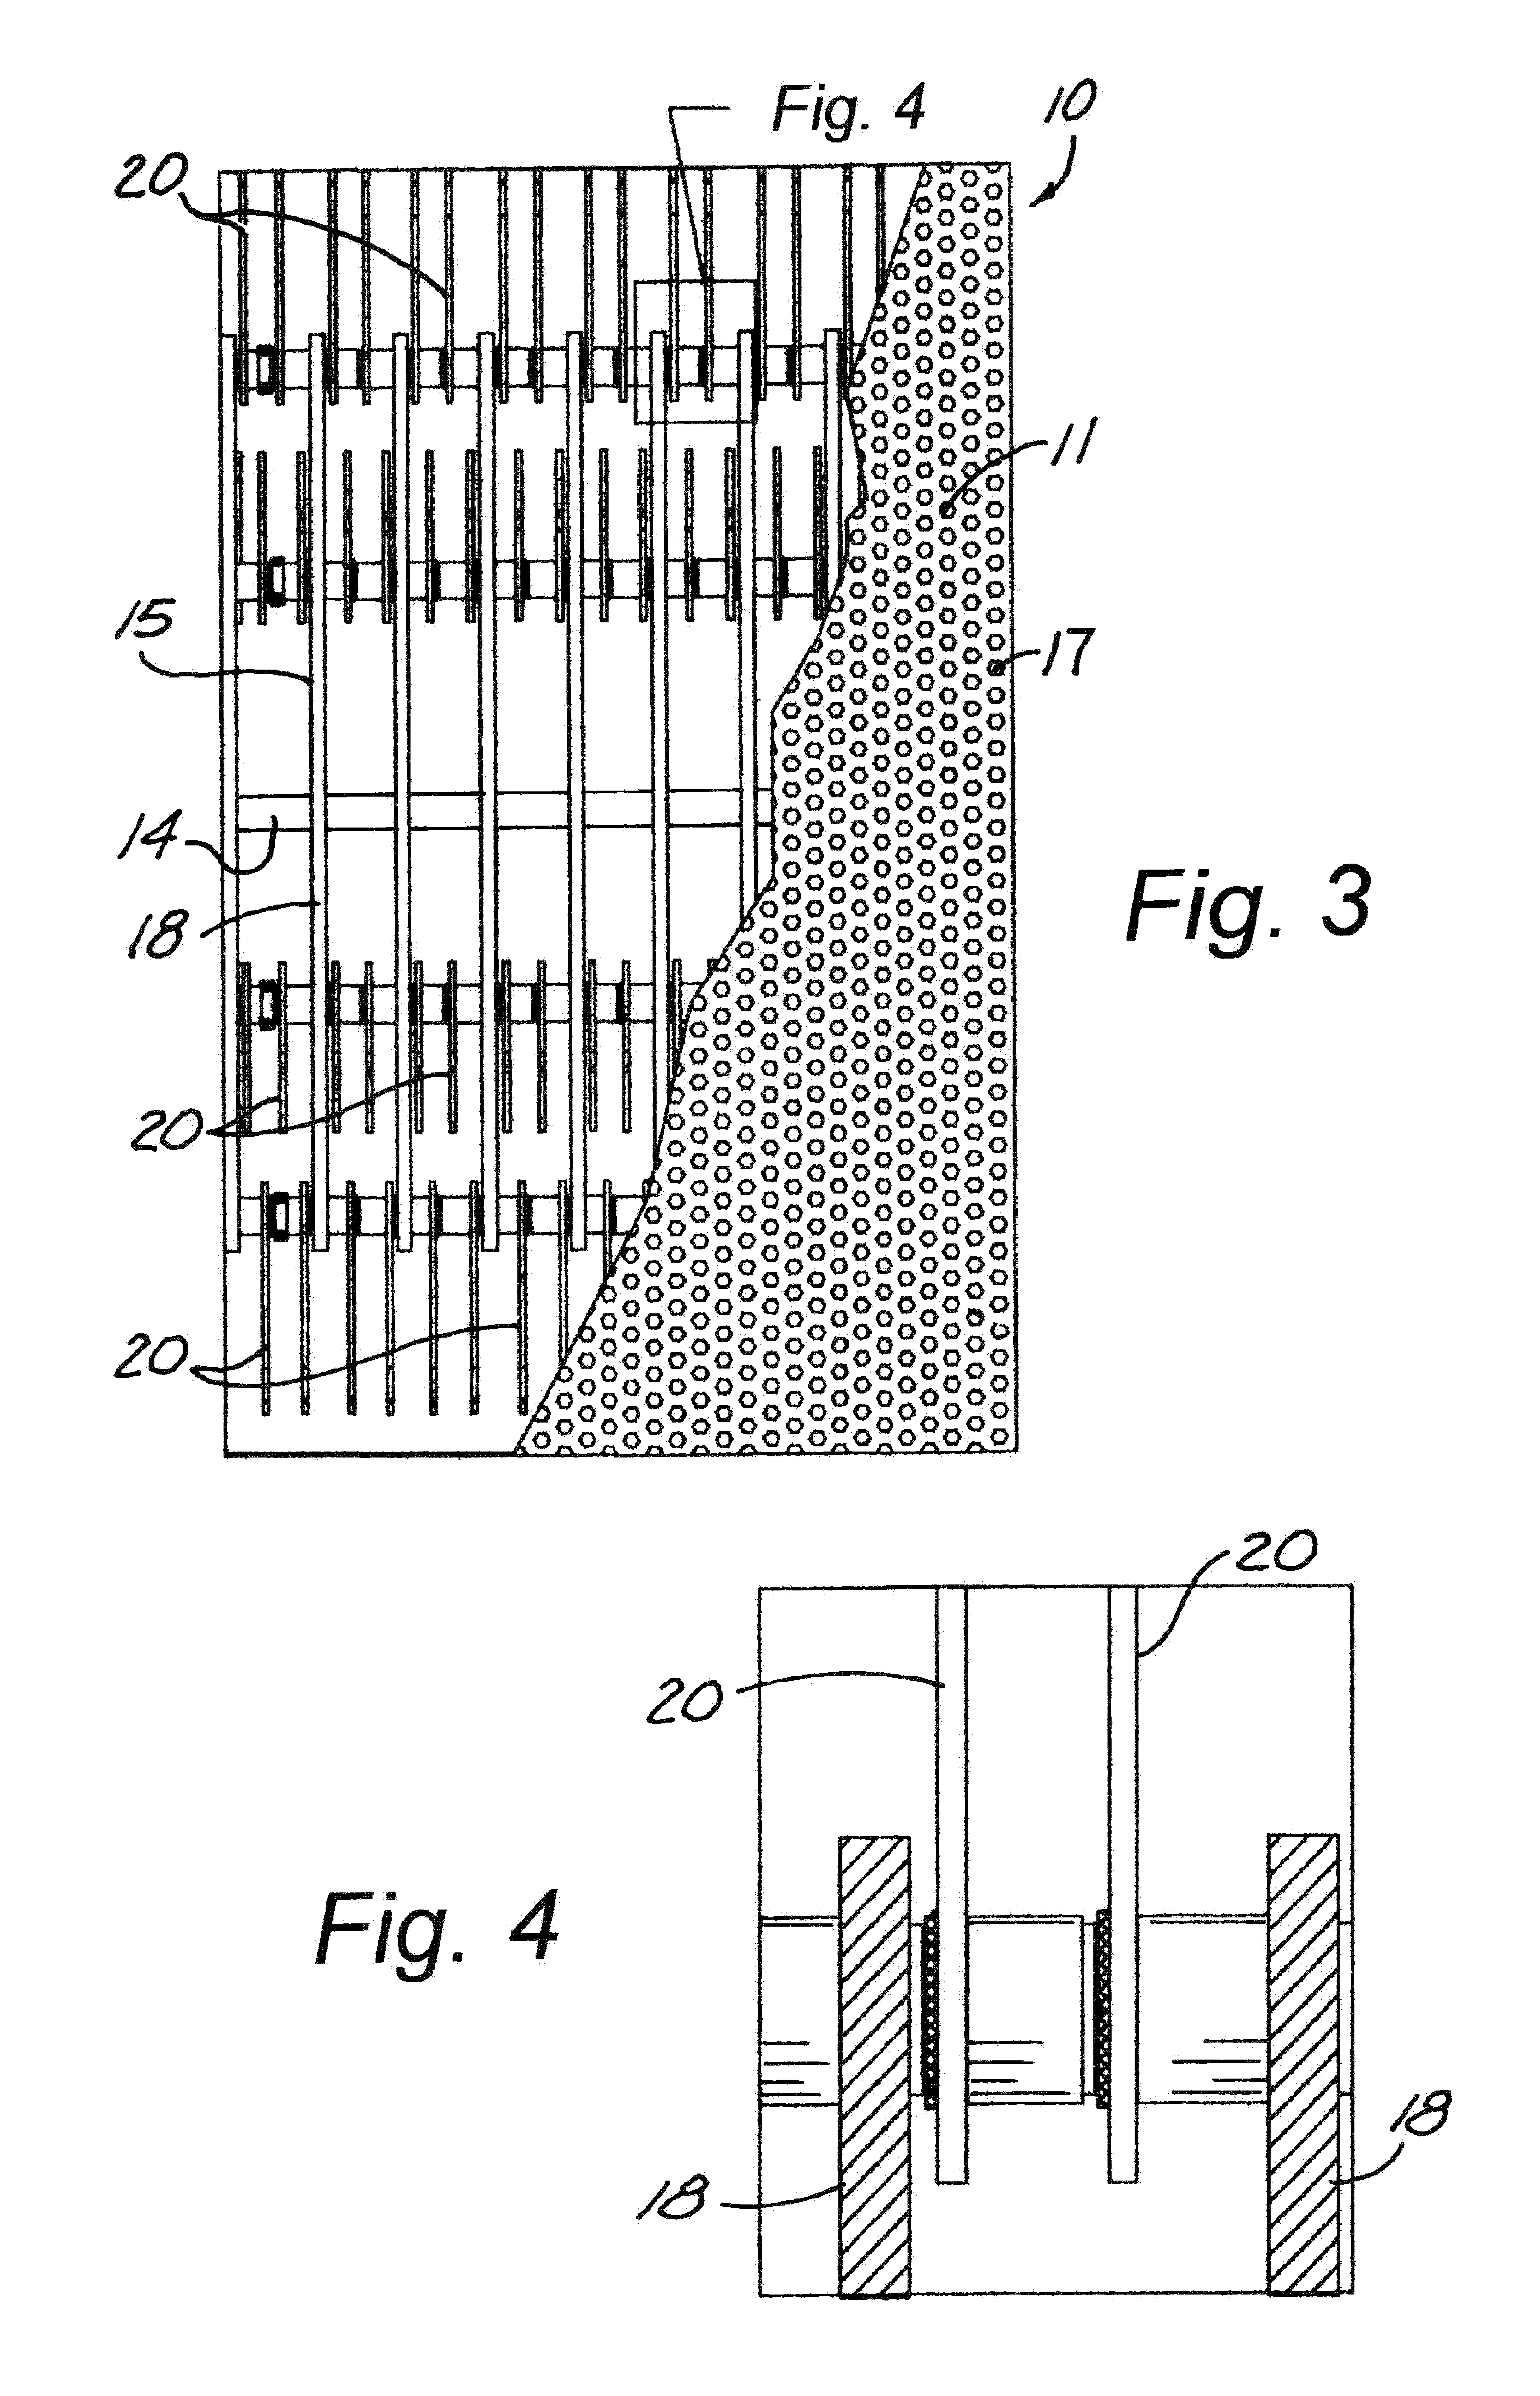 Apparatus for attaching hammers to a hammer mill